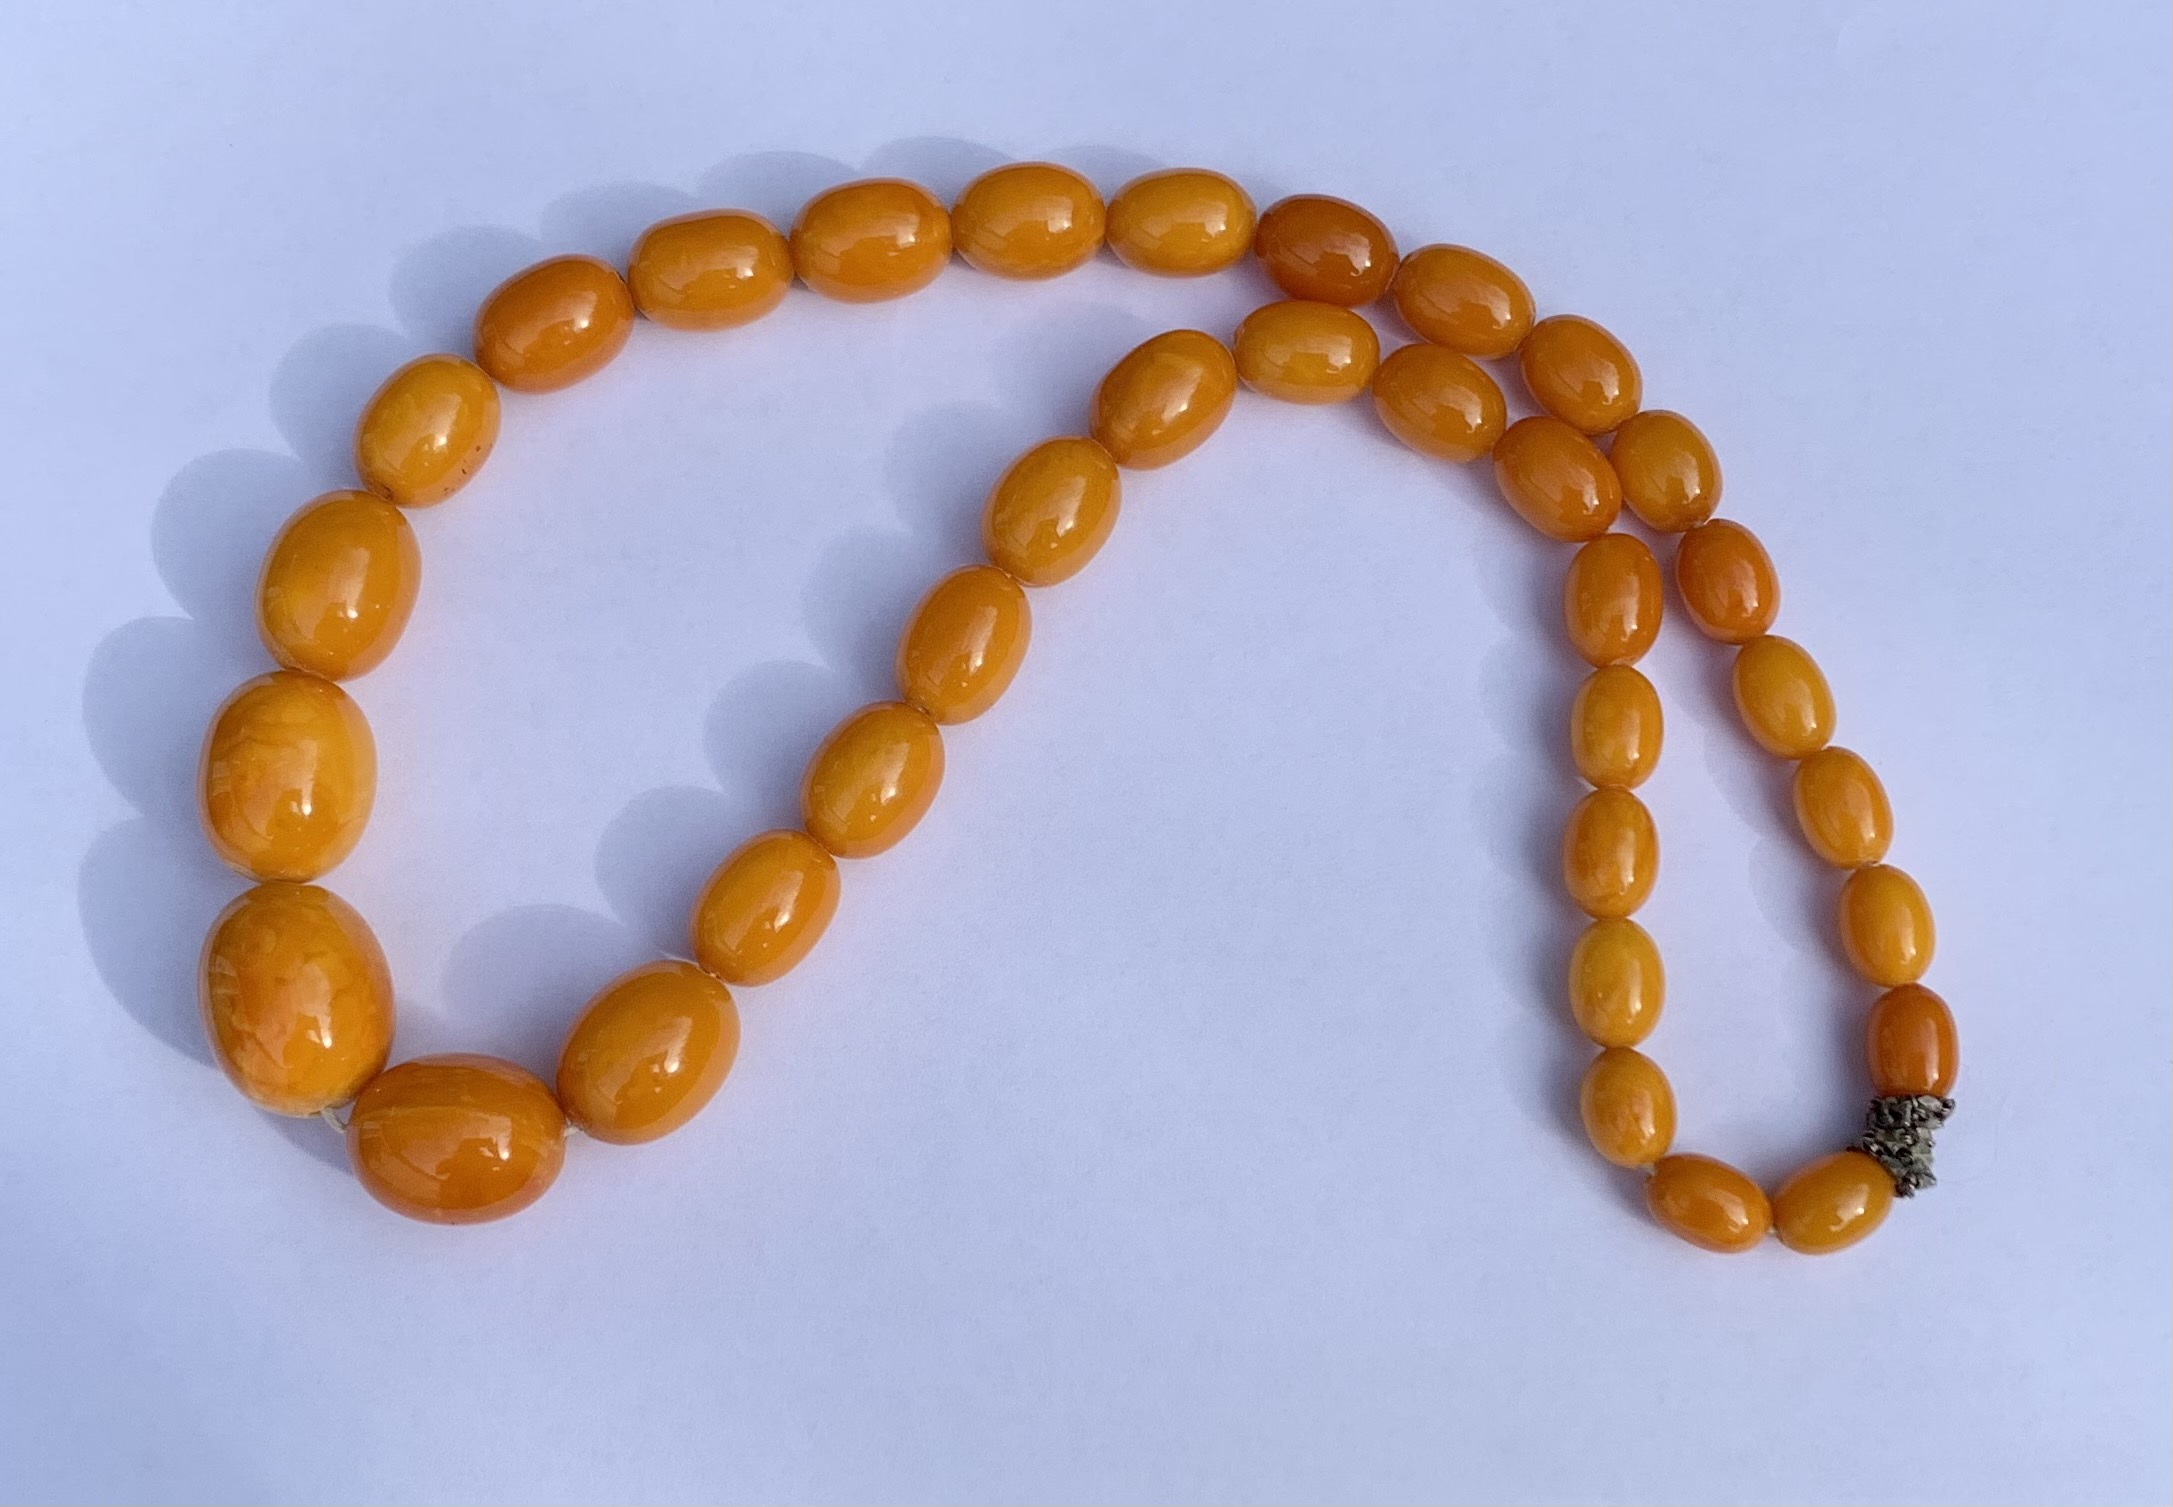 Amber necklace with 35 beads, w:89 gms - Image 7 of 8